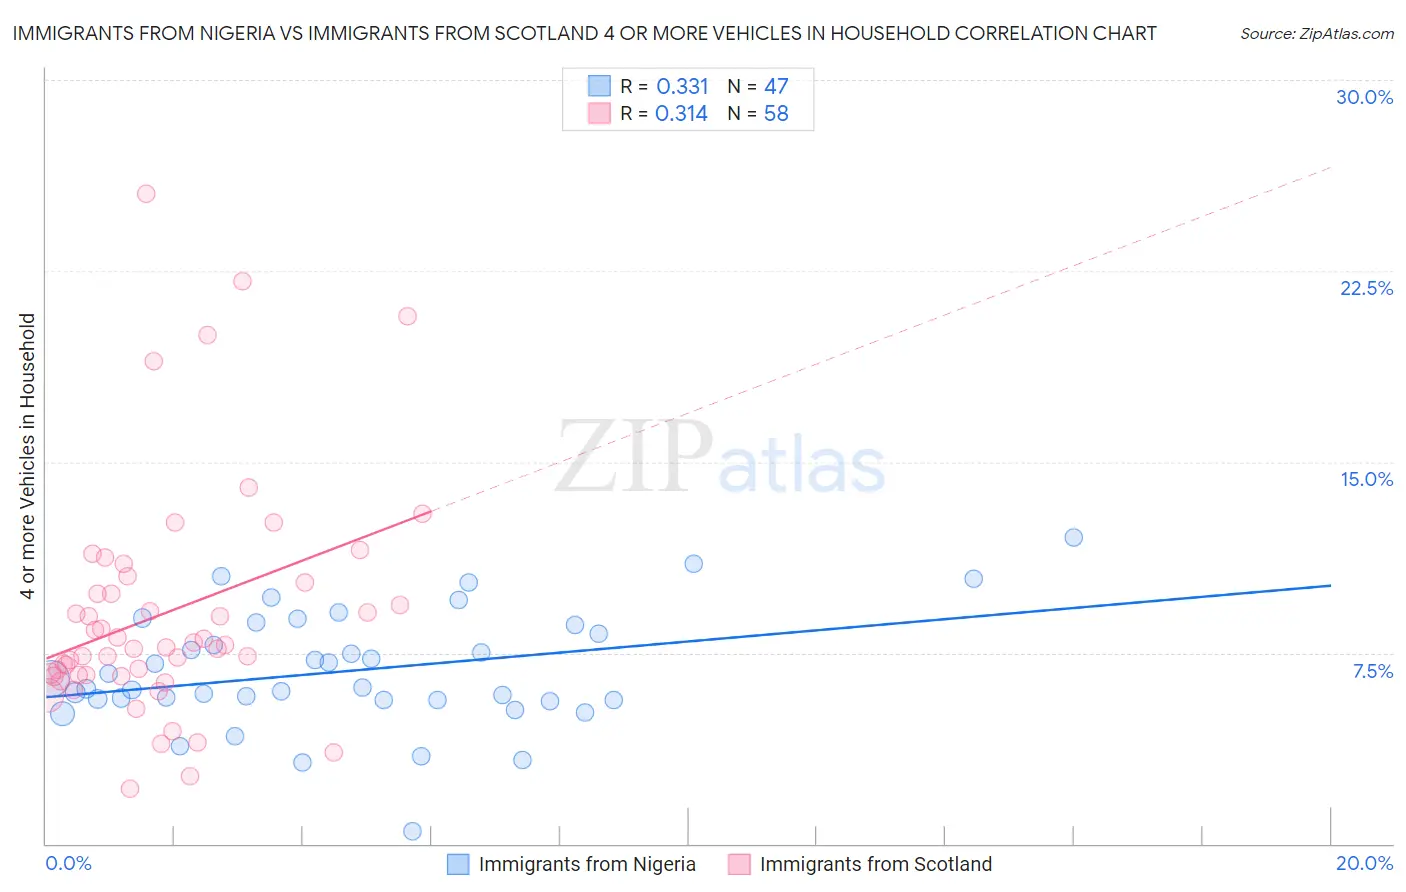 Immigrants from Nigeria vs Immigrants from Scotland 4 or more Vehicles in Household